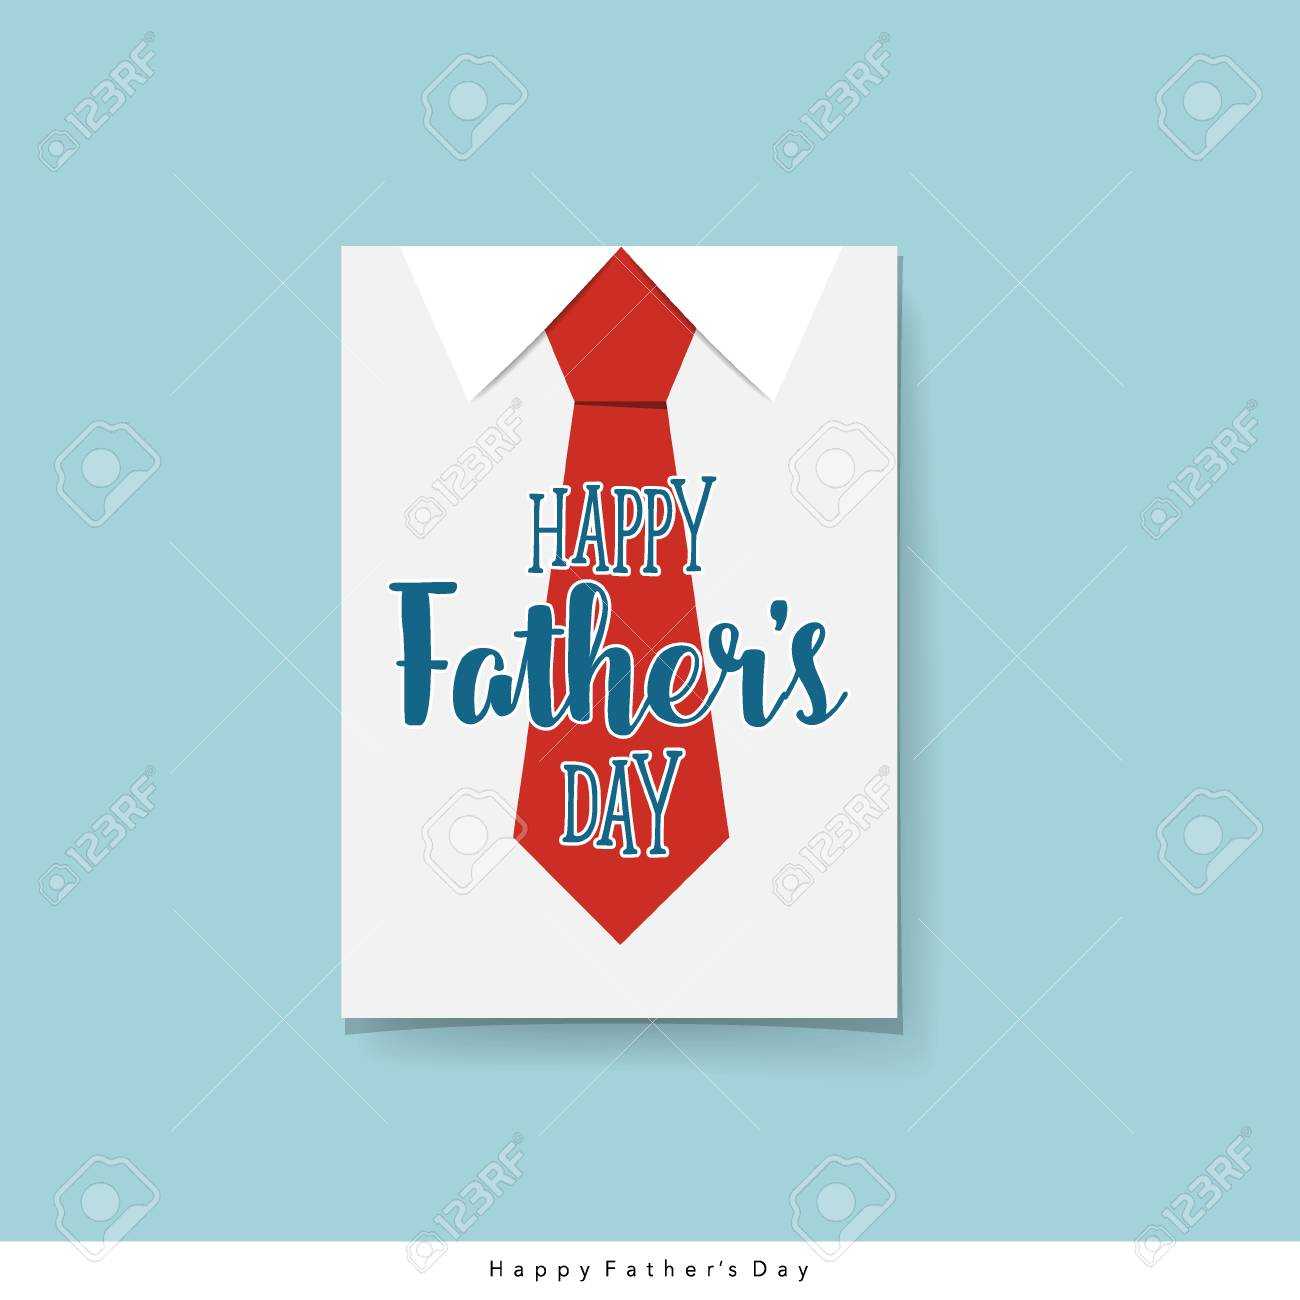 Happy Fathers Day Card Design With Big Tie. Vector Illustration. Throughout Fathers Day Card Template